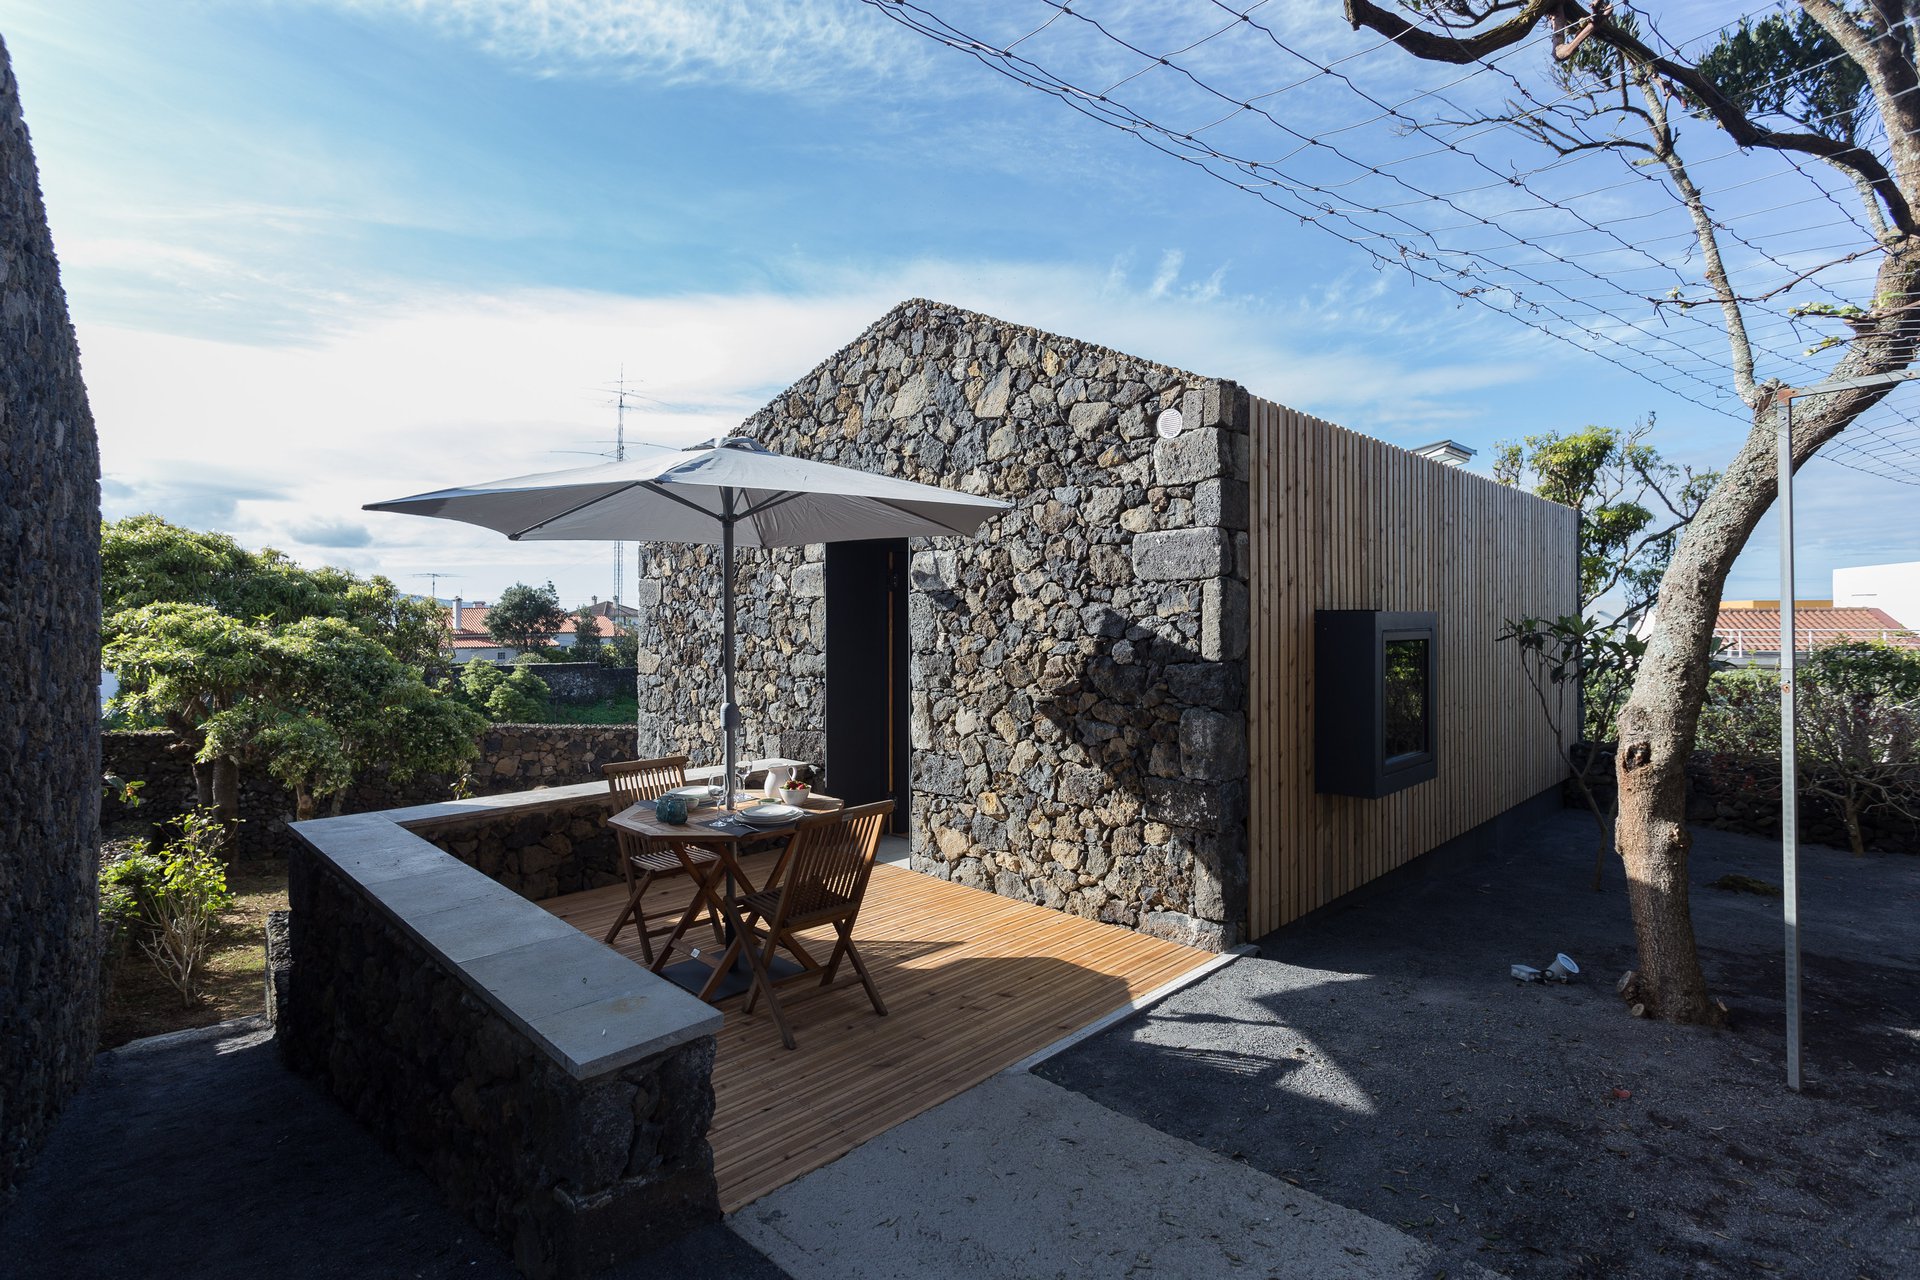 <p>Luxuriate in reinvented Azorean architecture and natural landscapes</p>
